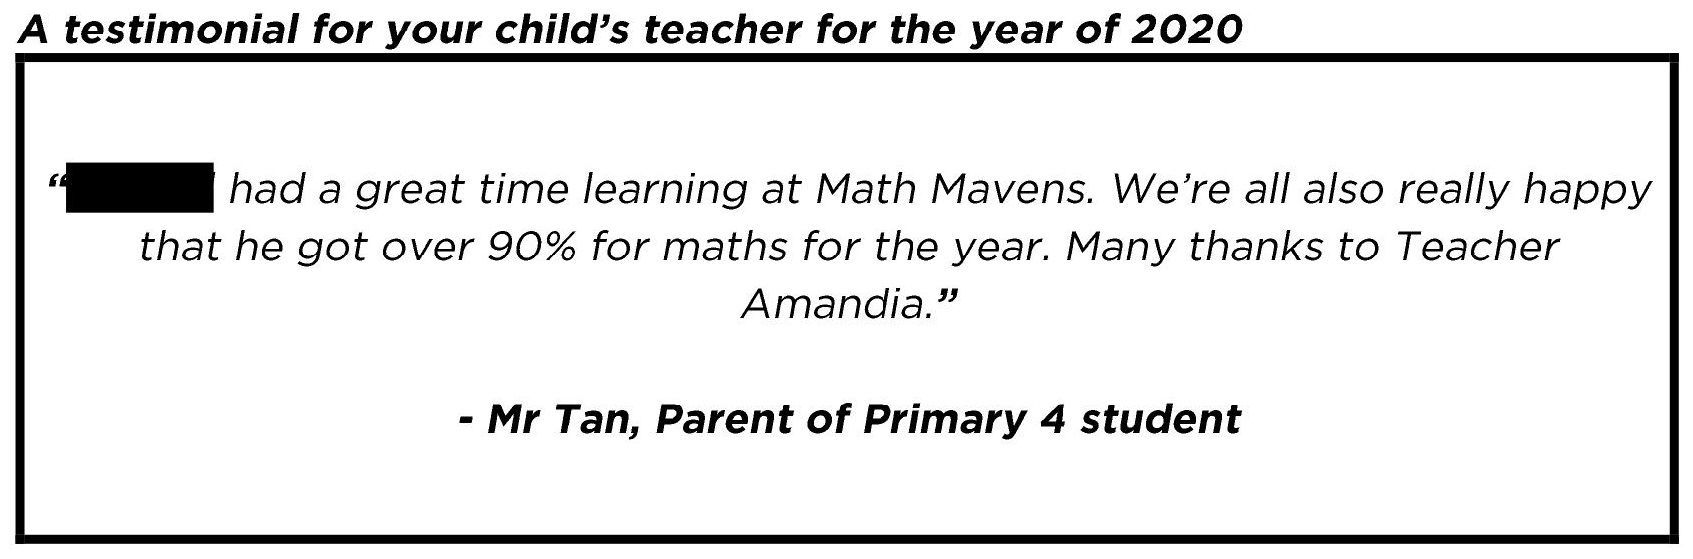 "We’re all also really happy that he got over 90% for maths for the year."